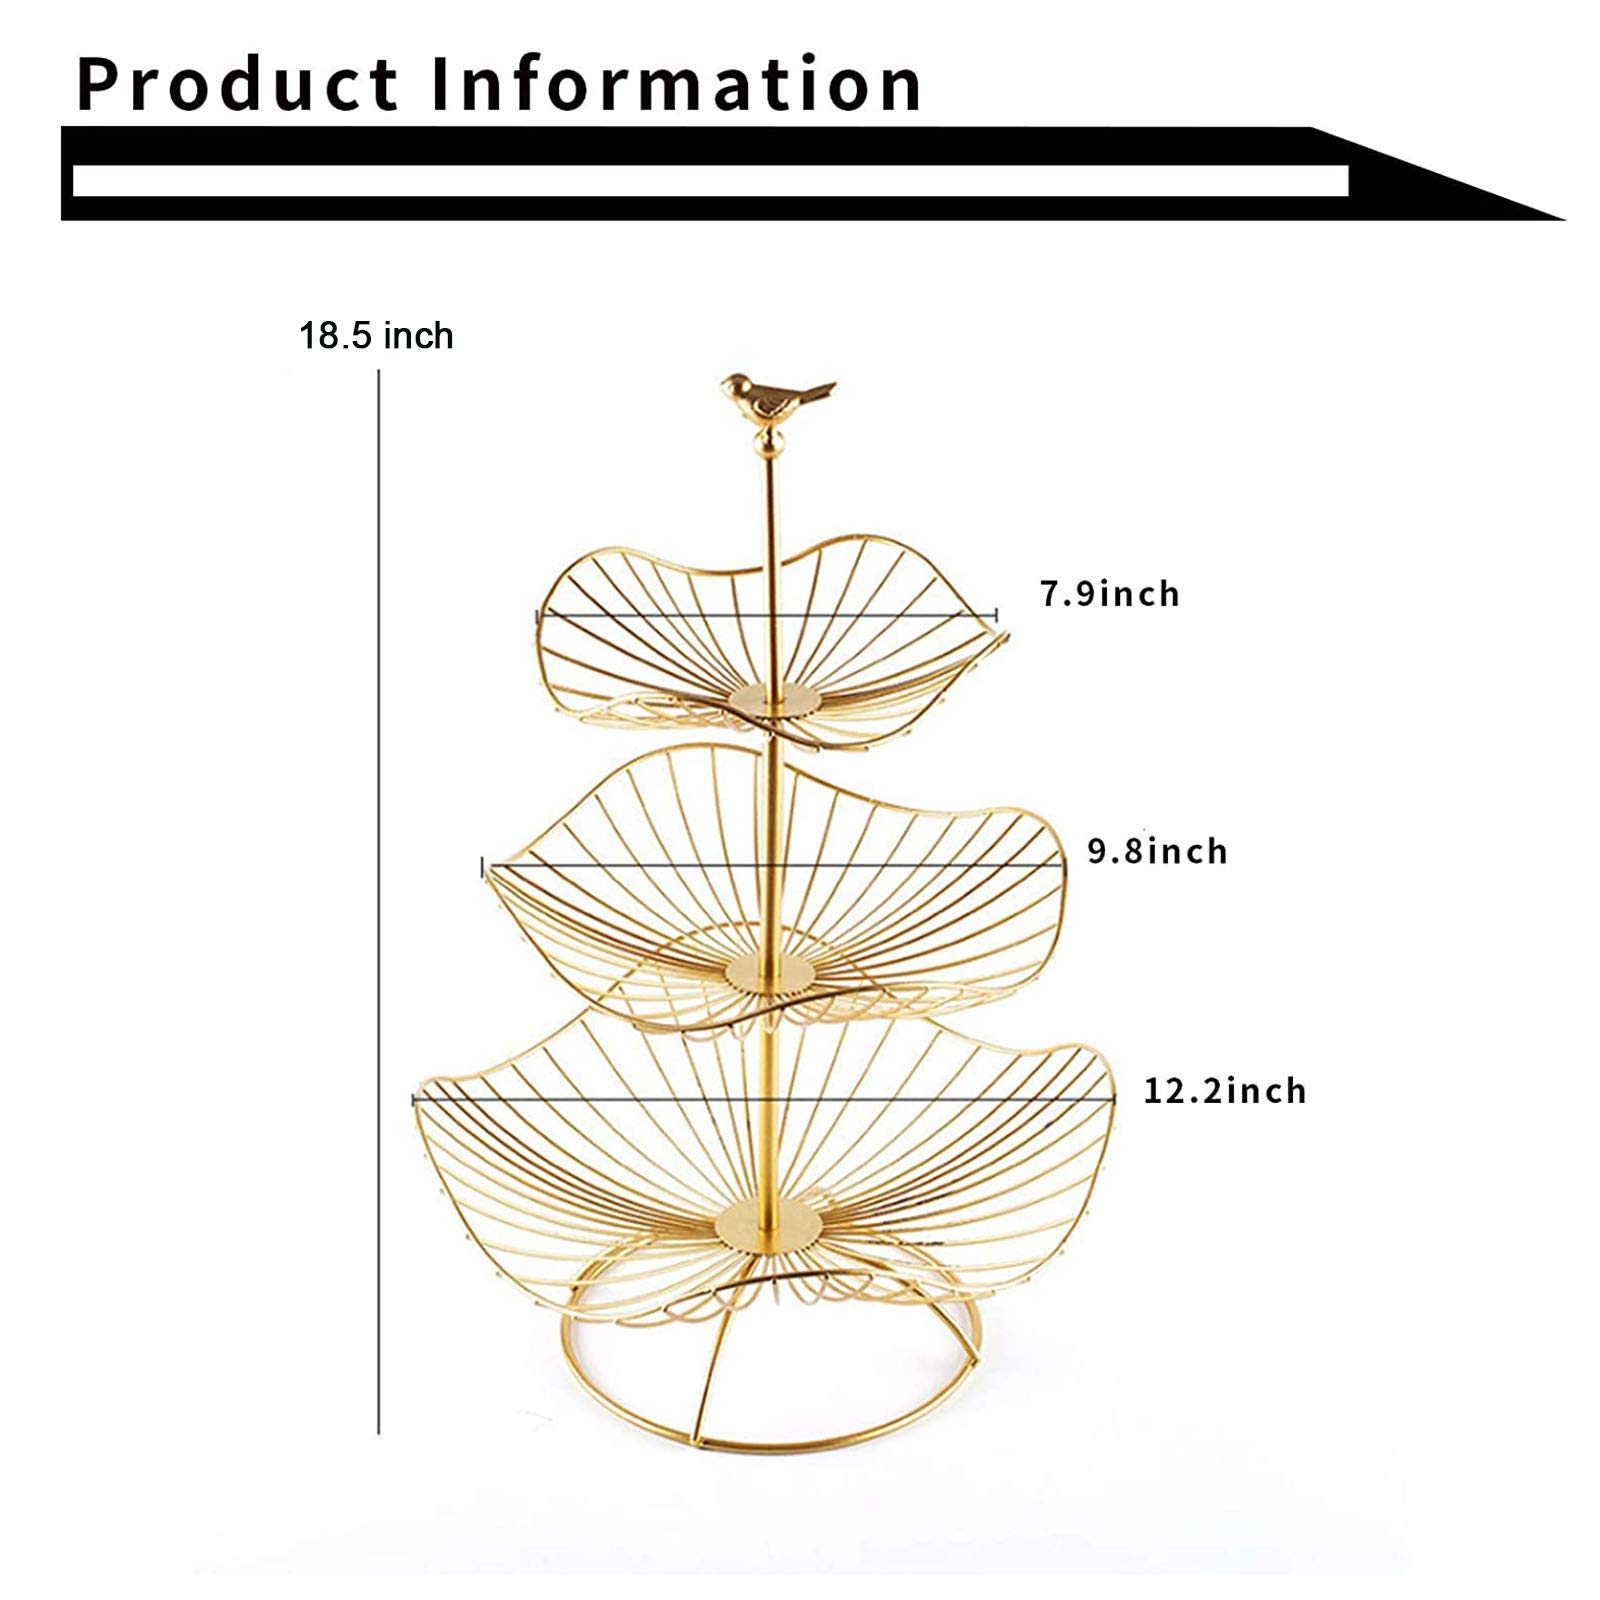 MINIDUo 3 Tier Fruit Basket,Metal Fruits Vegetable Bowl Desserts Candy Buffet Plates Serving Tray for Family Dinner Birthday Party Wedding-Gold,LotusLeafBlack